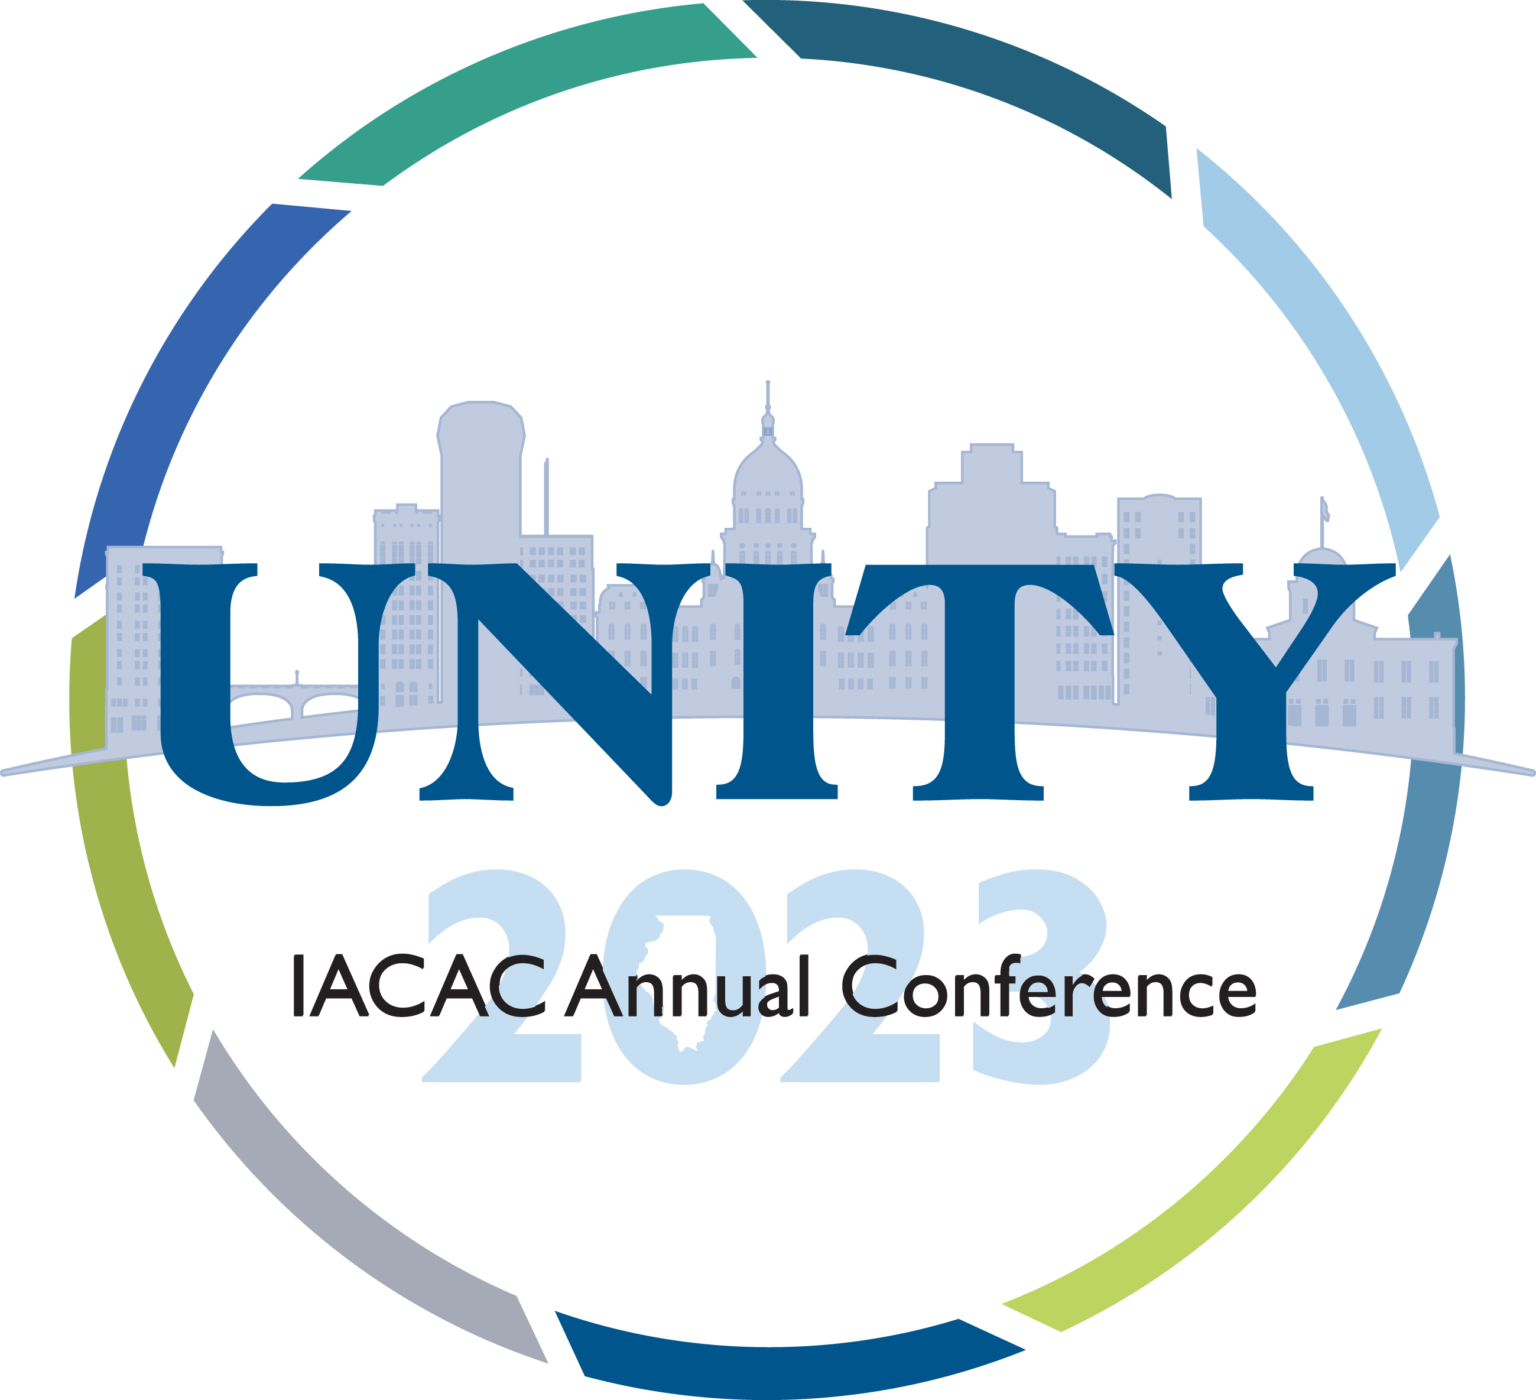 Conference IACAC